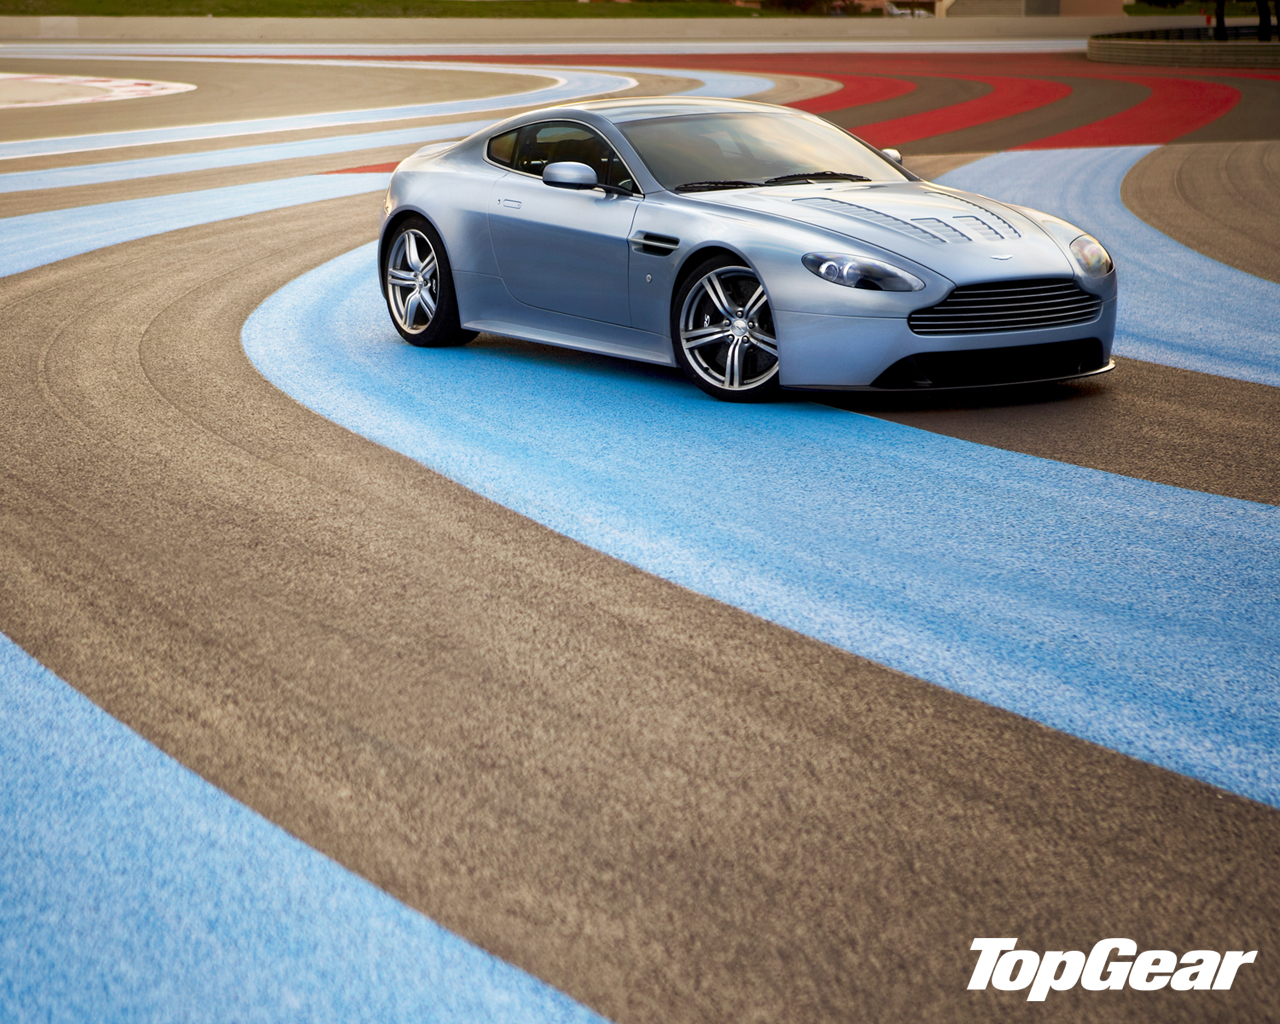 Top Gear Wallpapers: Aston Martin V12 Vantage at the Paul Ricard Race  Track. 